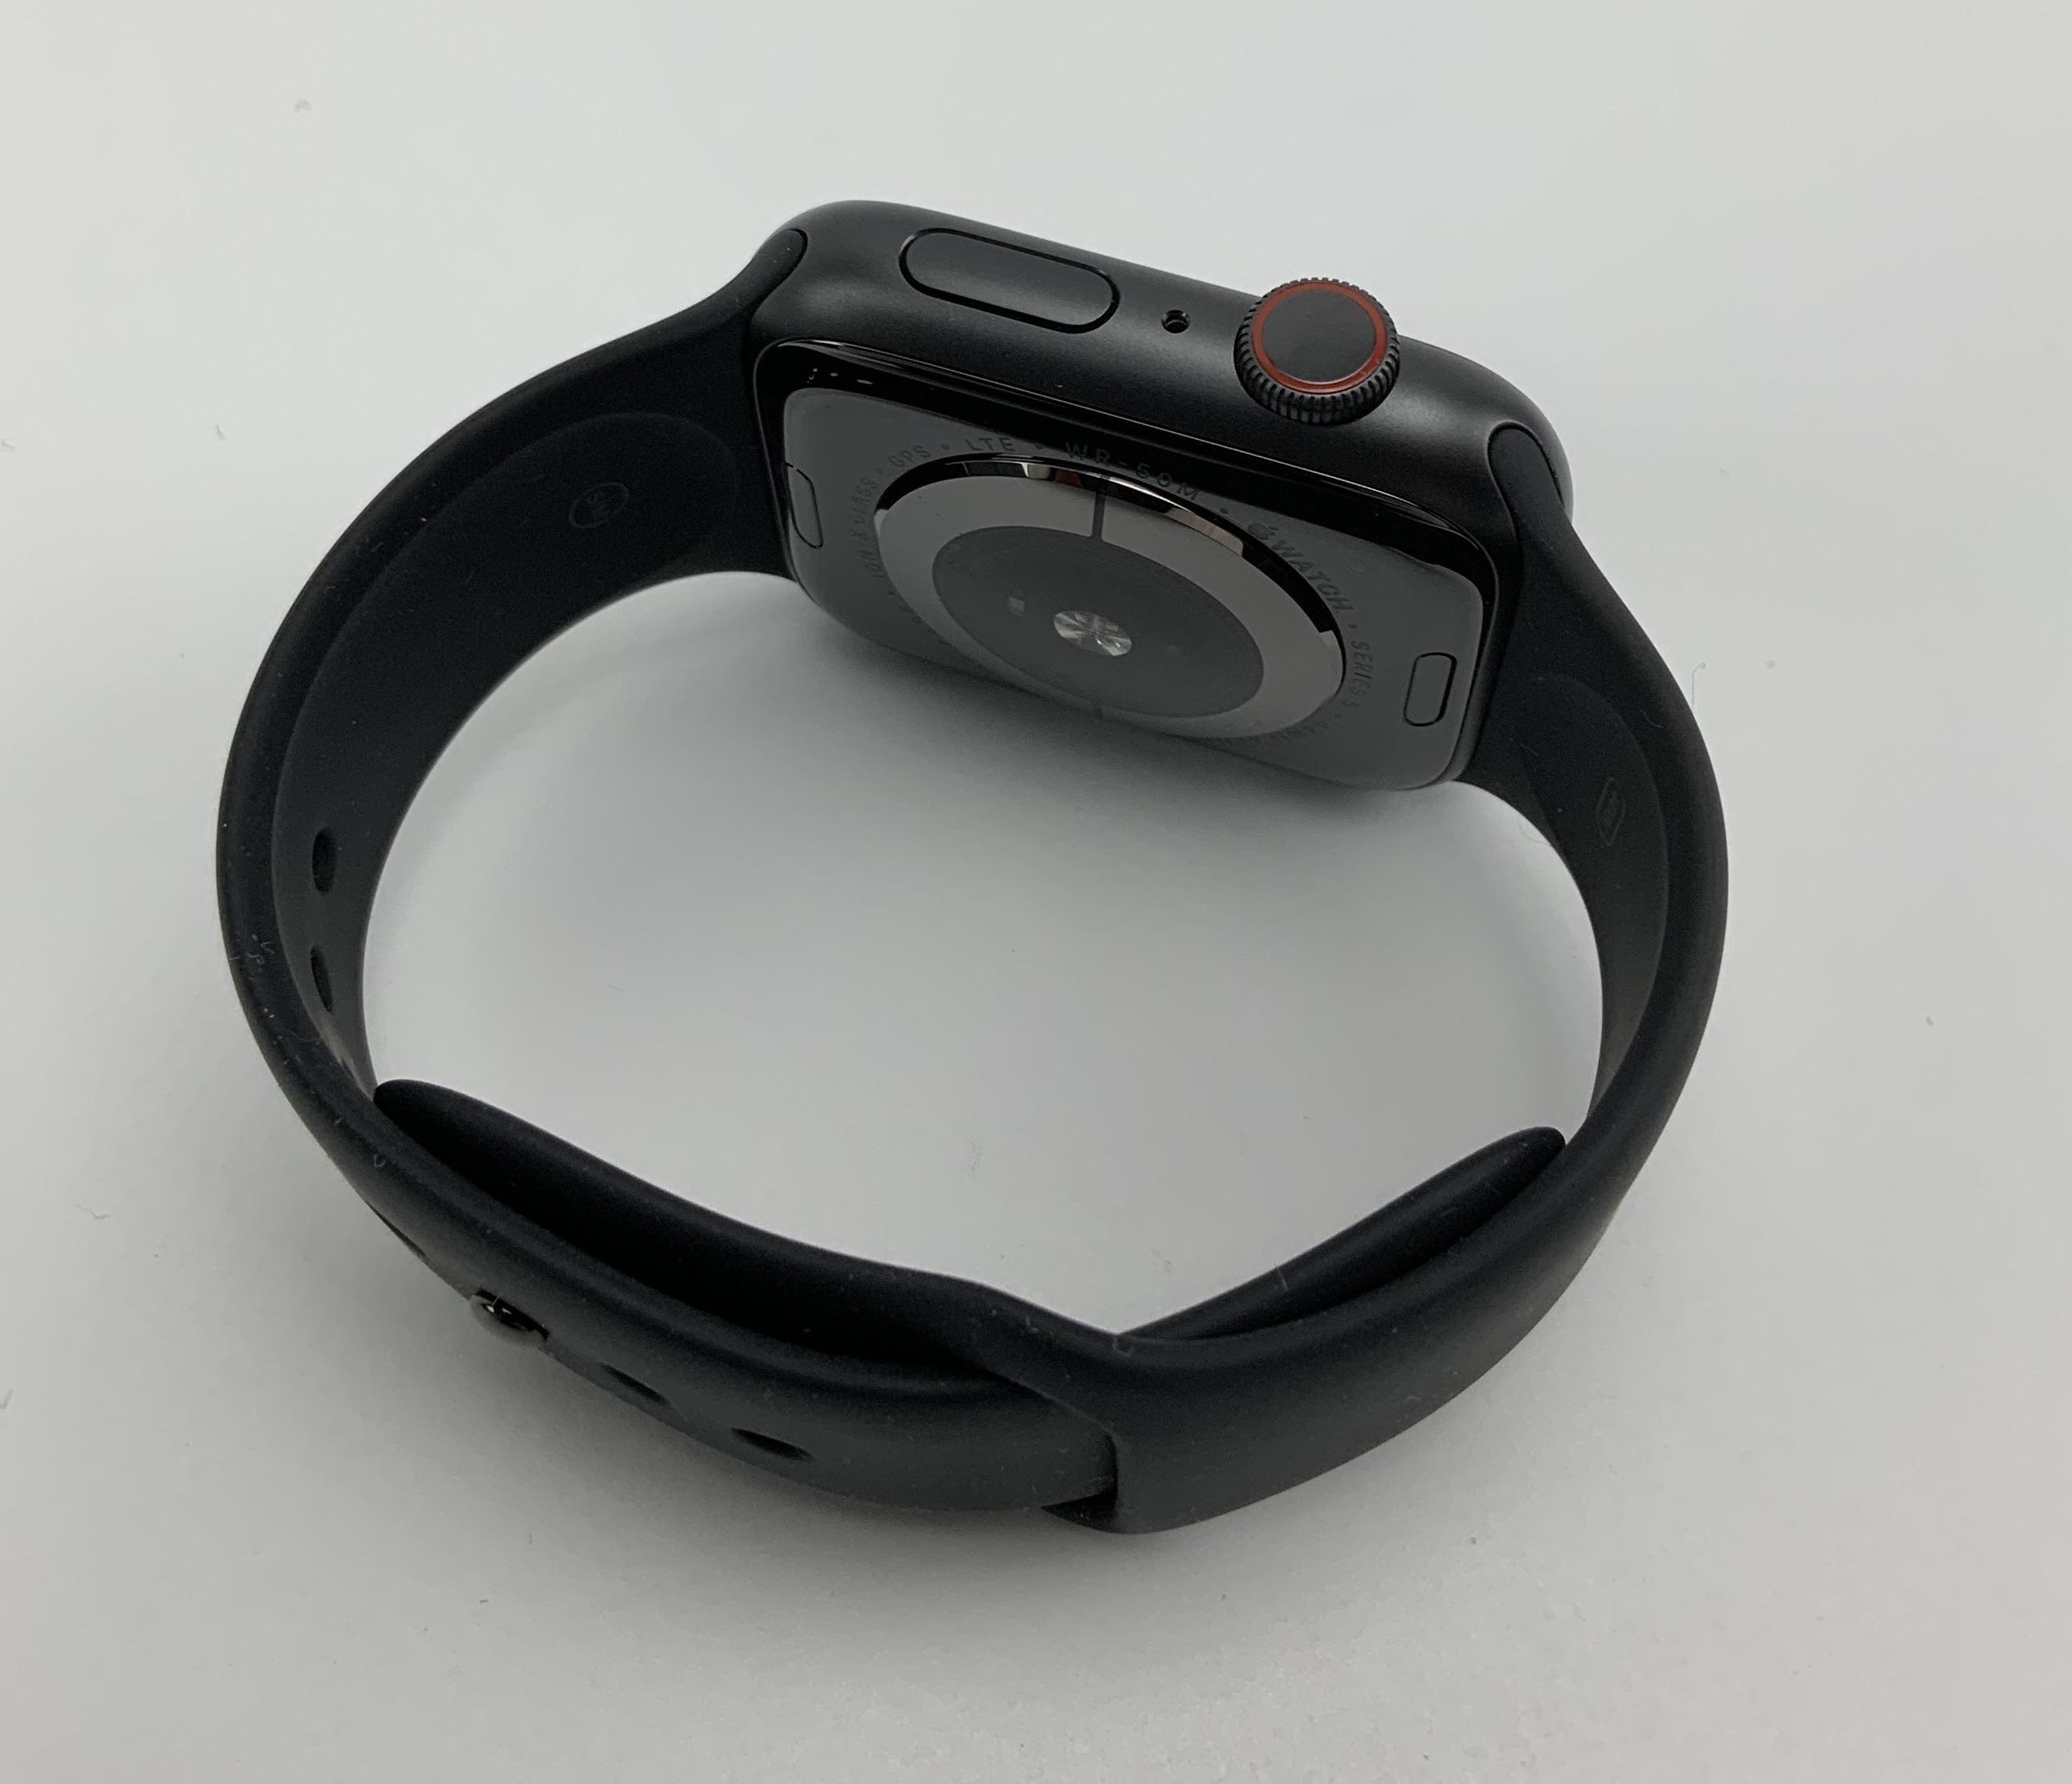 Watch Series 5 Aluminum Cellular (44mm), Space Gray, image 2